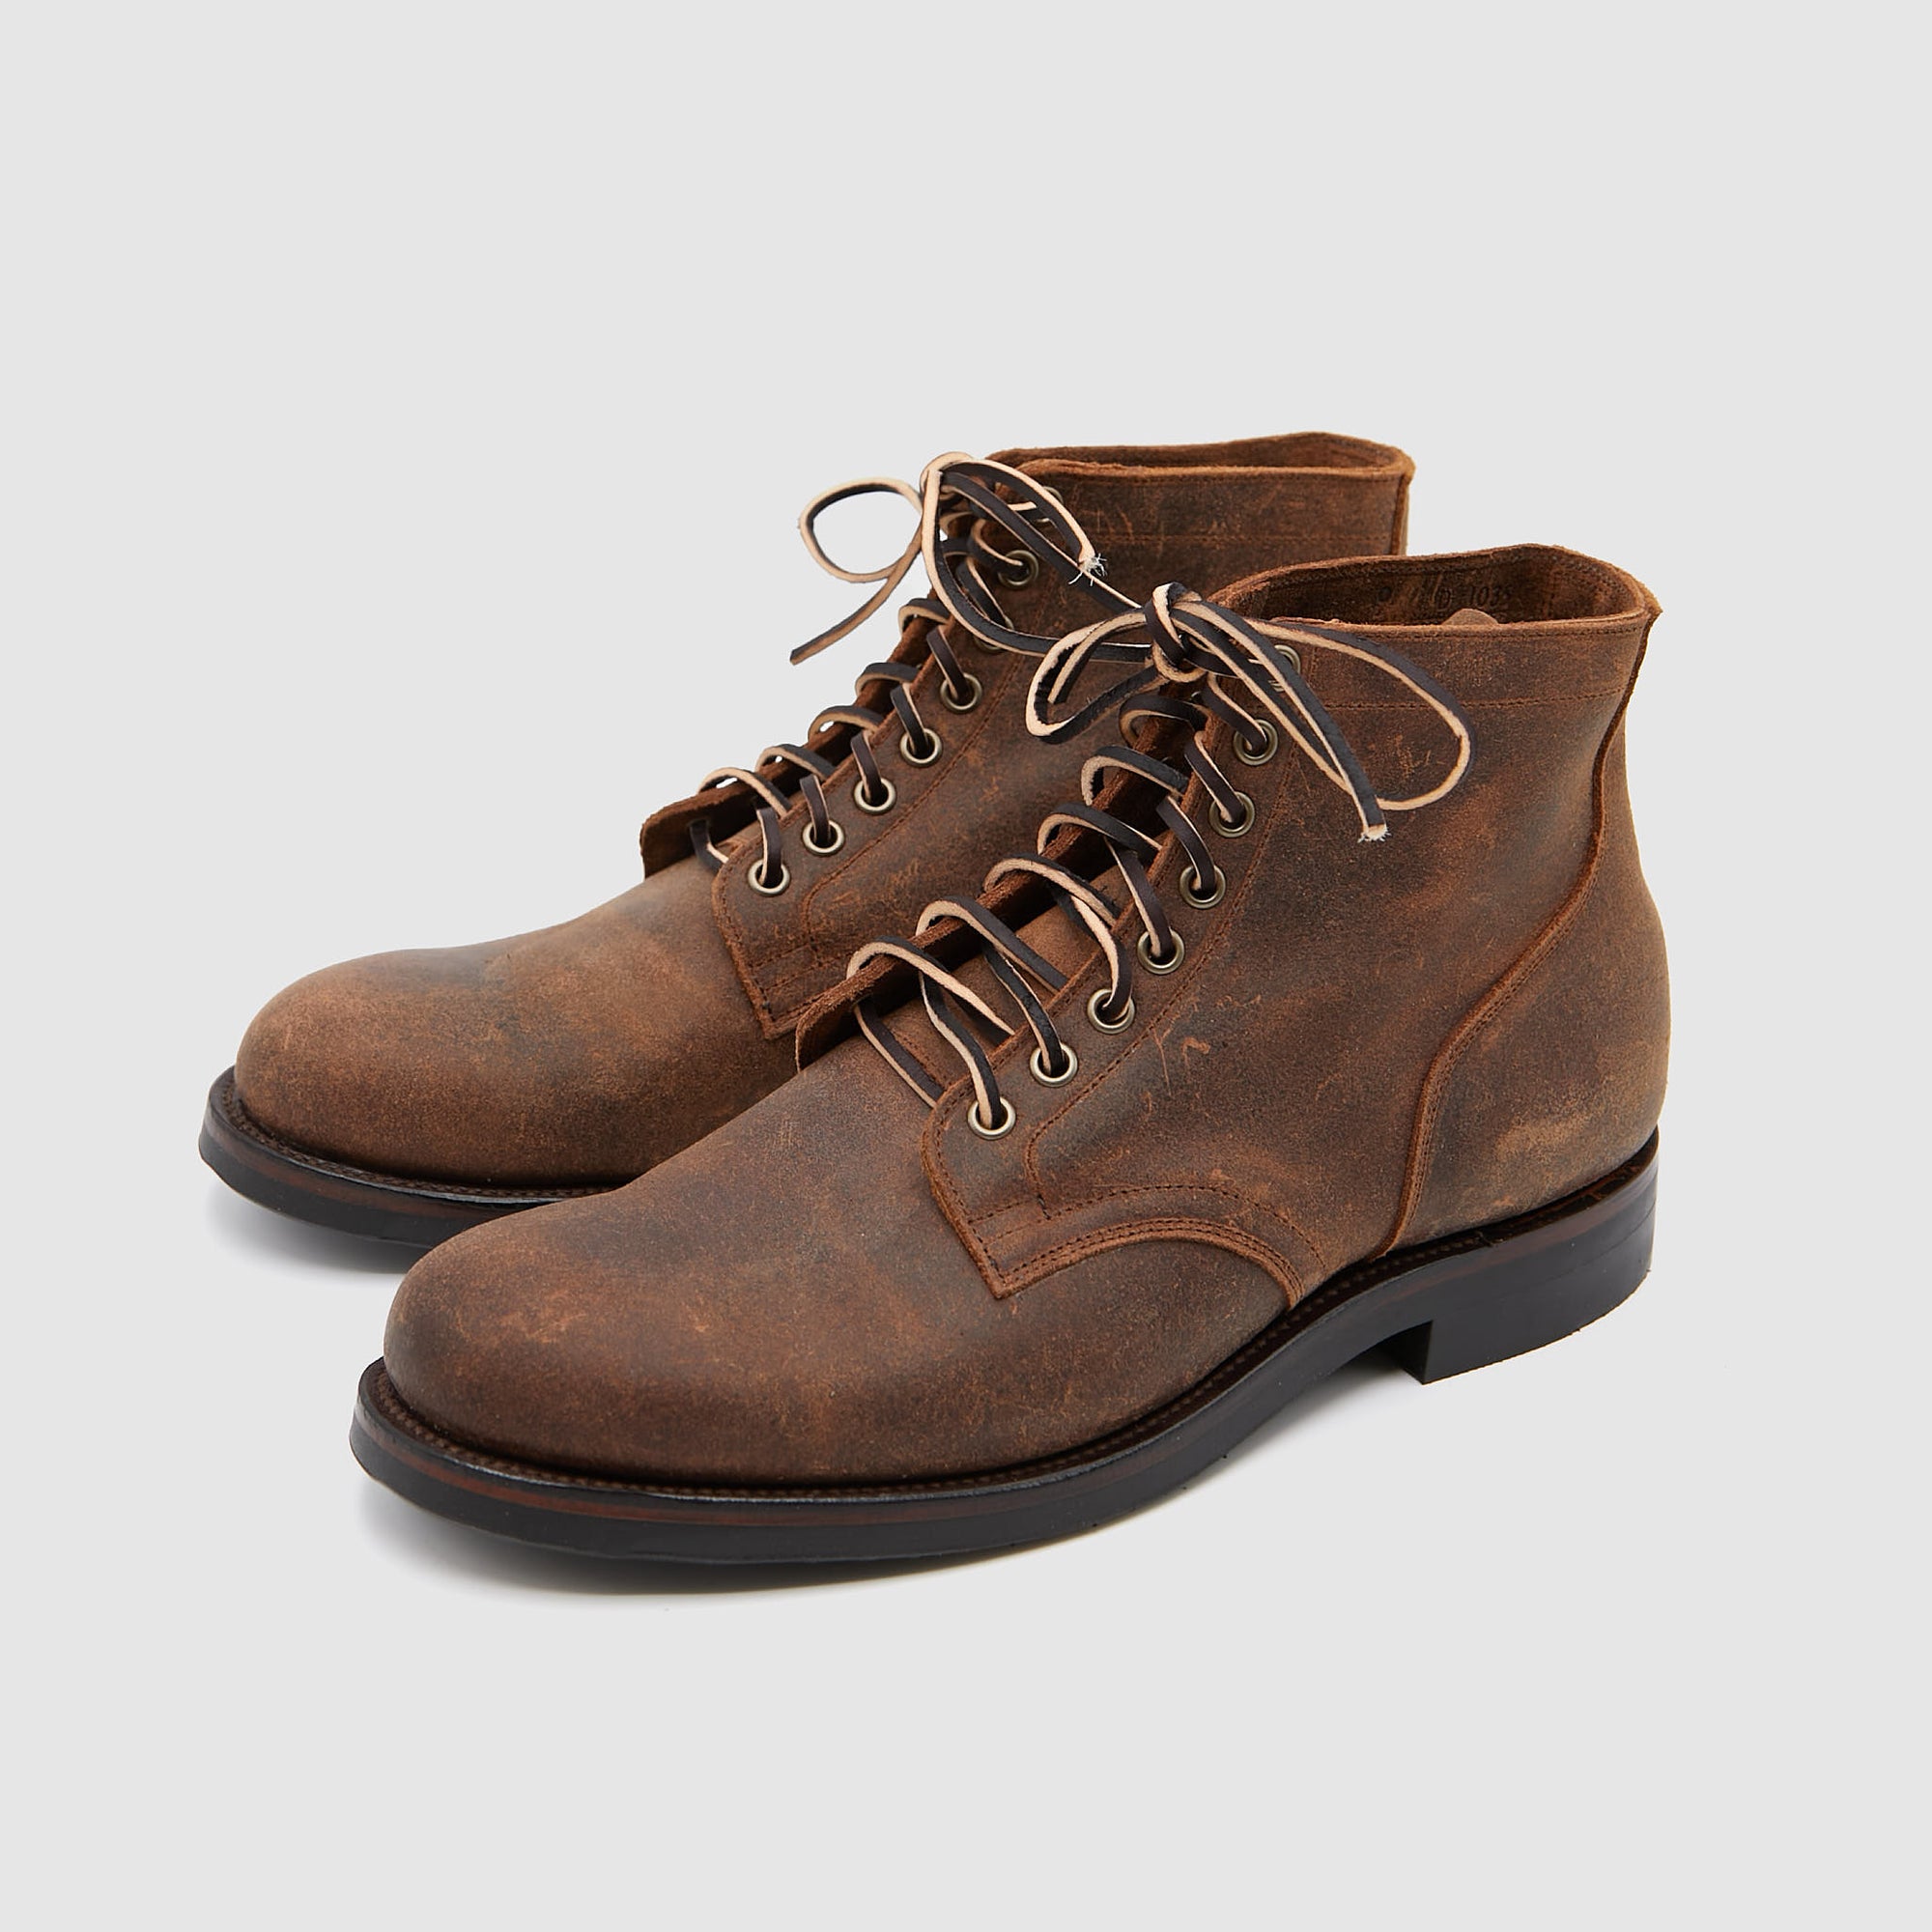 Viberg Service Boot Distressed Rawhide Leather